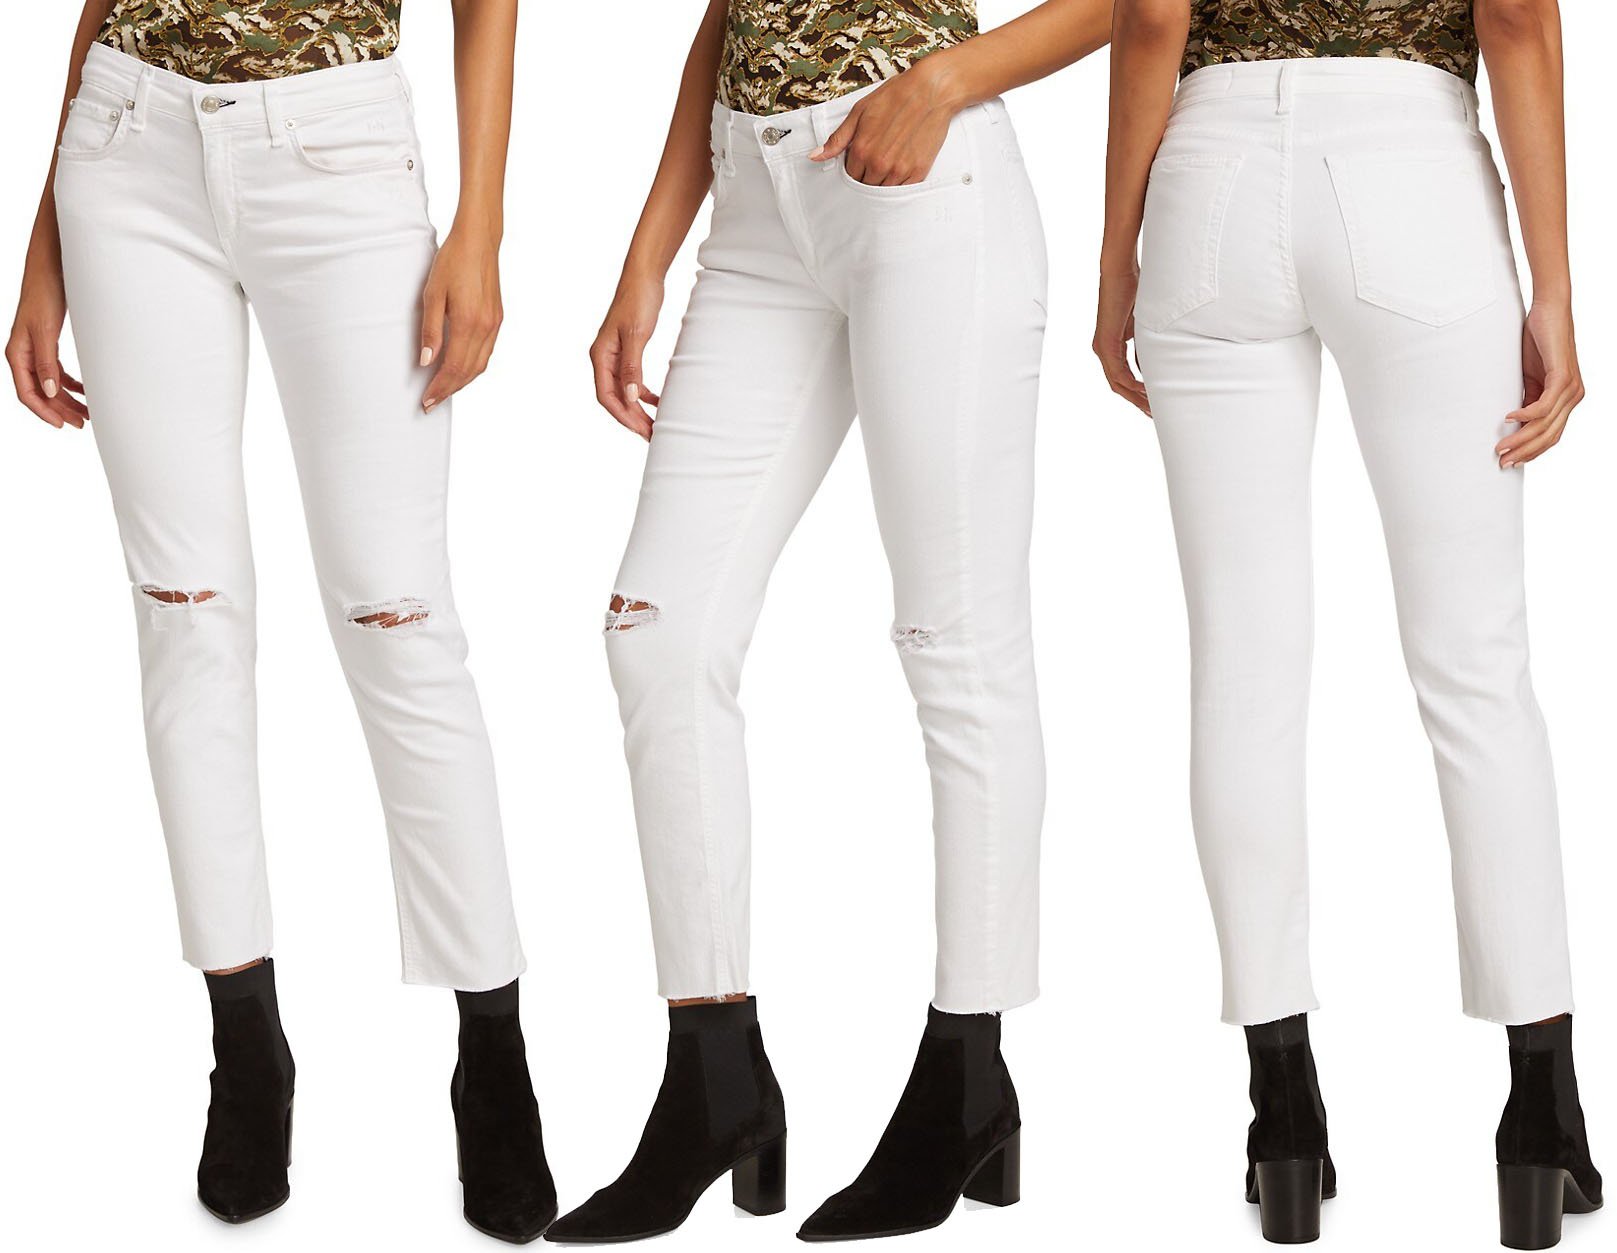 Cropped jeans should end just right above the ankle boots to create a flattering look